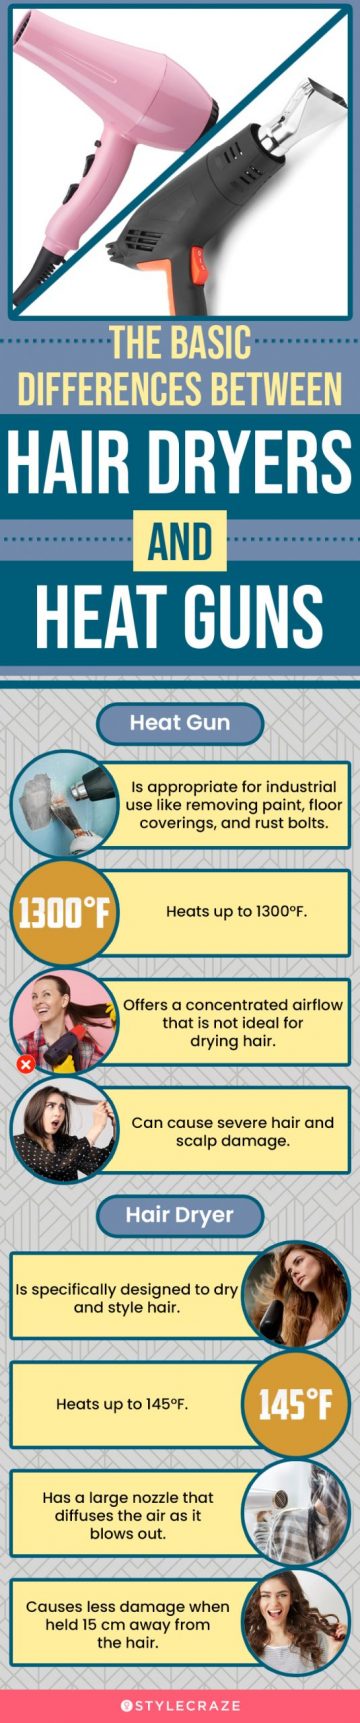 the basic differences between hair dryers and heat guns (infographic)